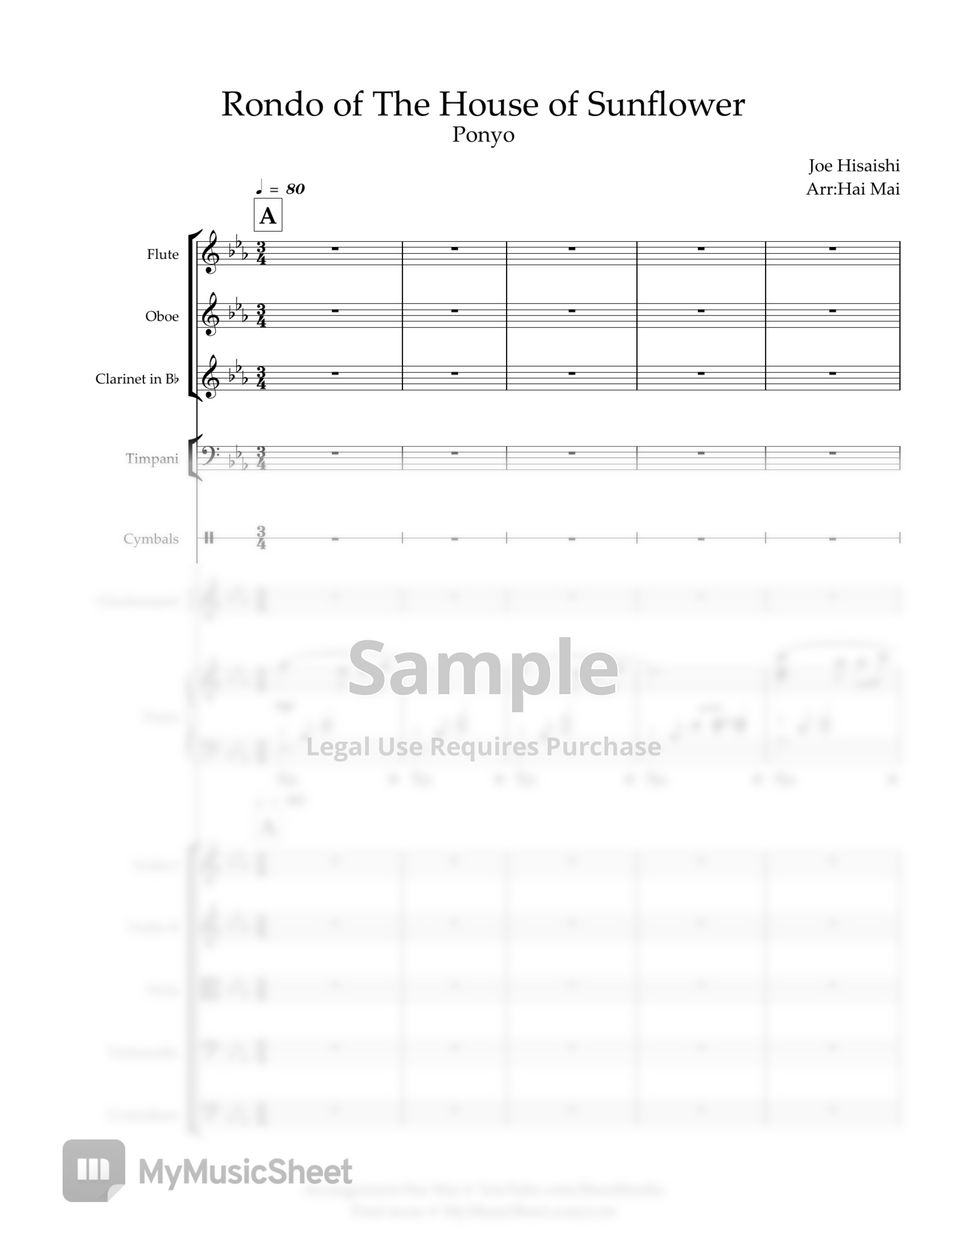 Joe Hisaishi - Rondo of The House of Sunflower for Orchestra - Score and Part by Hai Mai